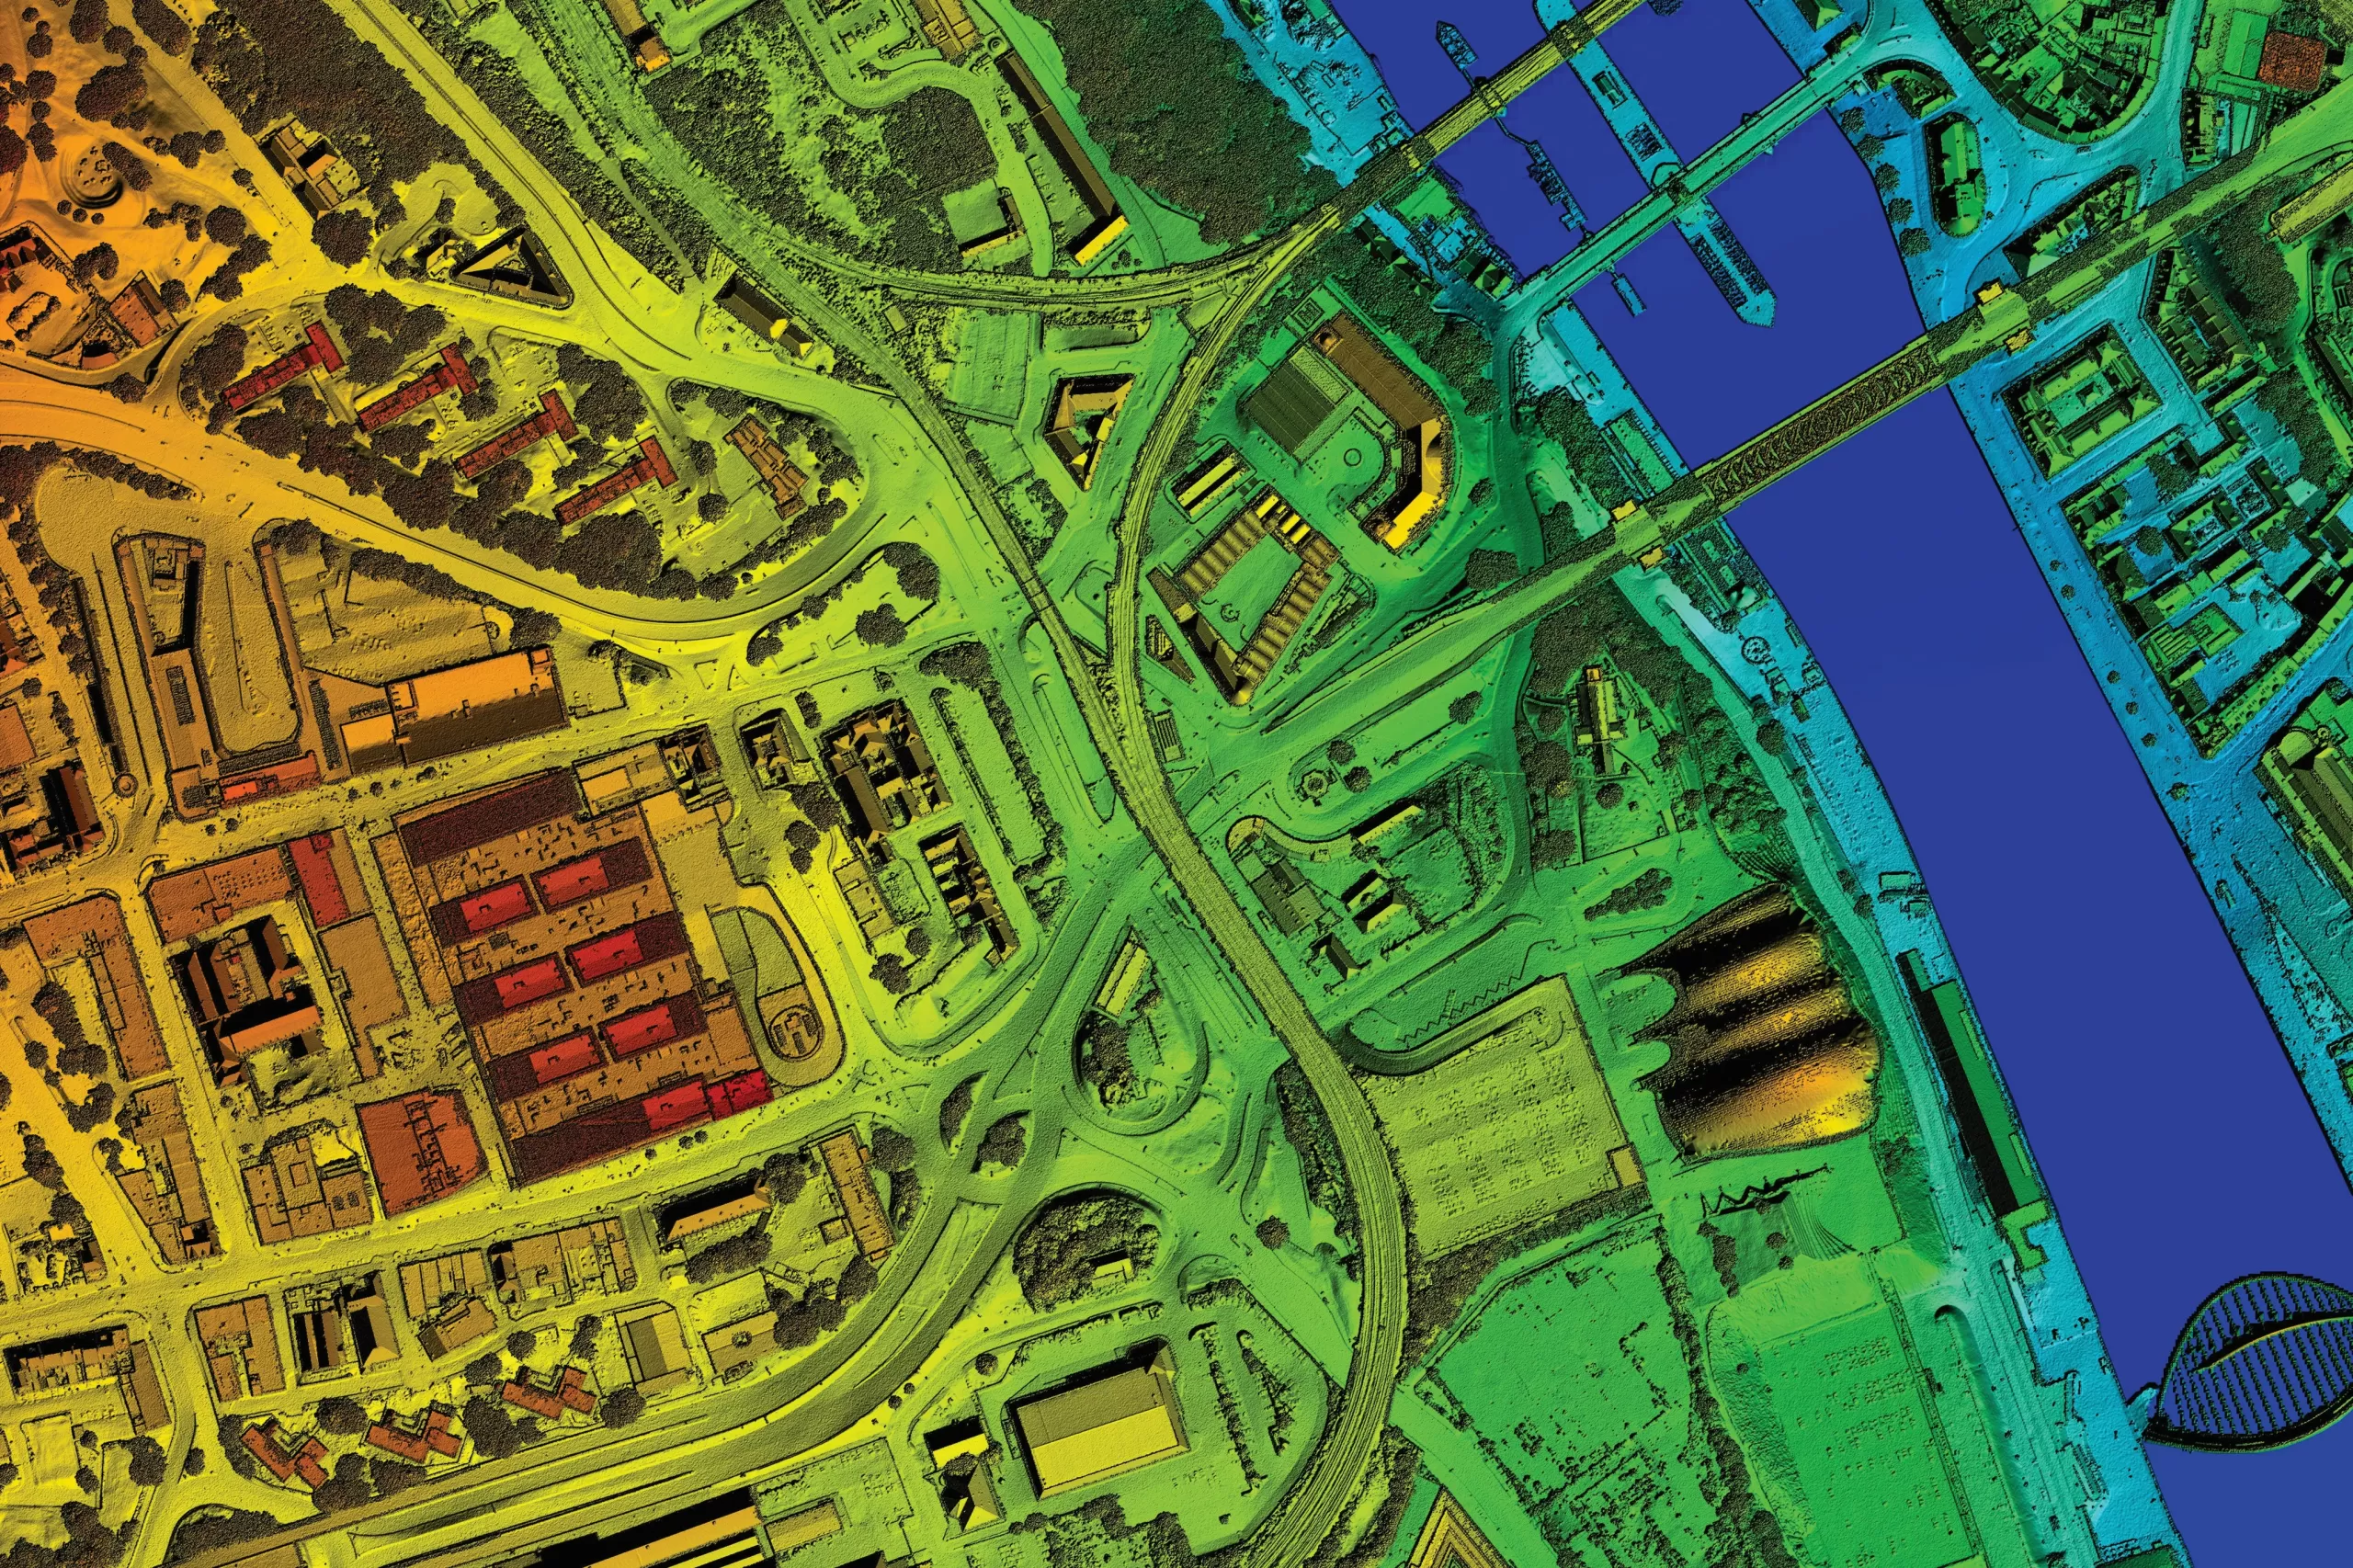 LiDAR height data over an urban area with buildings, roads and a river.